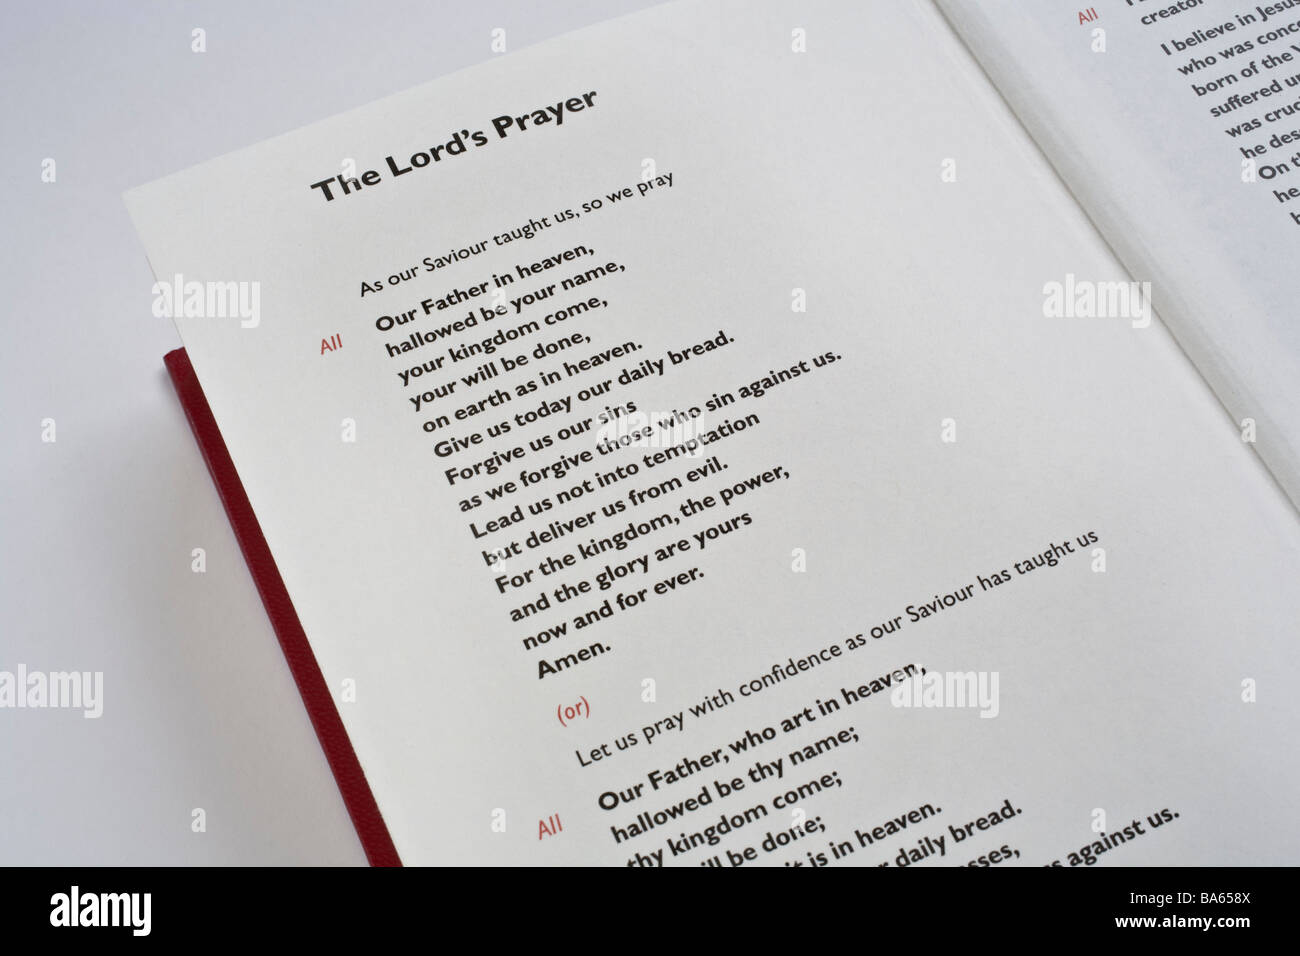 The Lords Prayer Christian prayer printed in a book of prayers Stock Photo